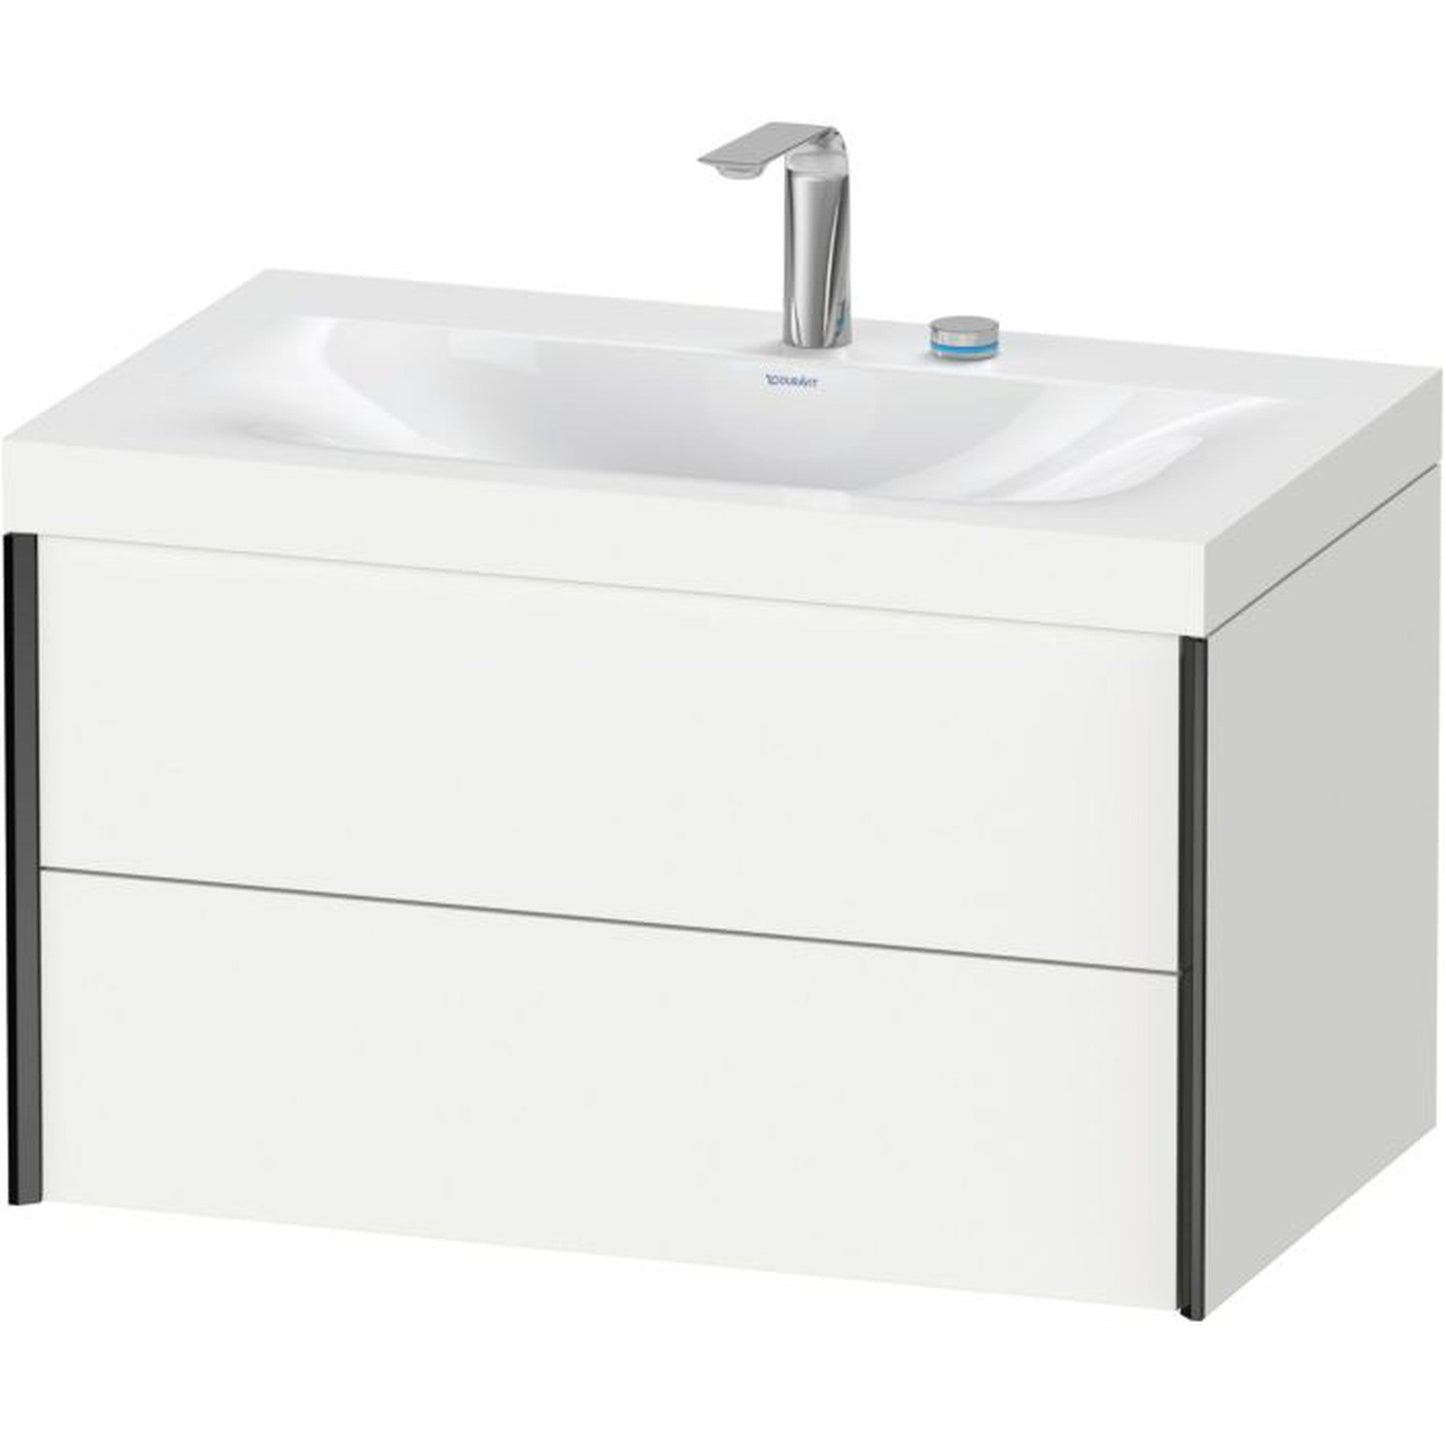 Duravit Xviu 31" x 20" x 19" Two Drawer C-Bonded Wall-Mount Vanity Kit With Two Tap Holes, White (XV4615EB218C)